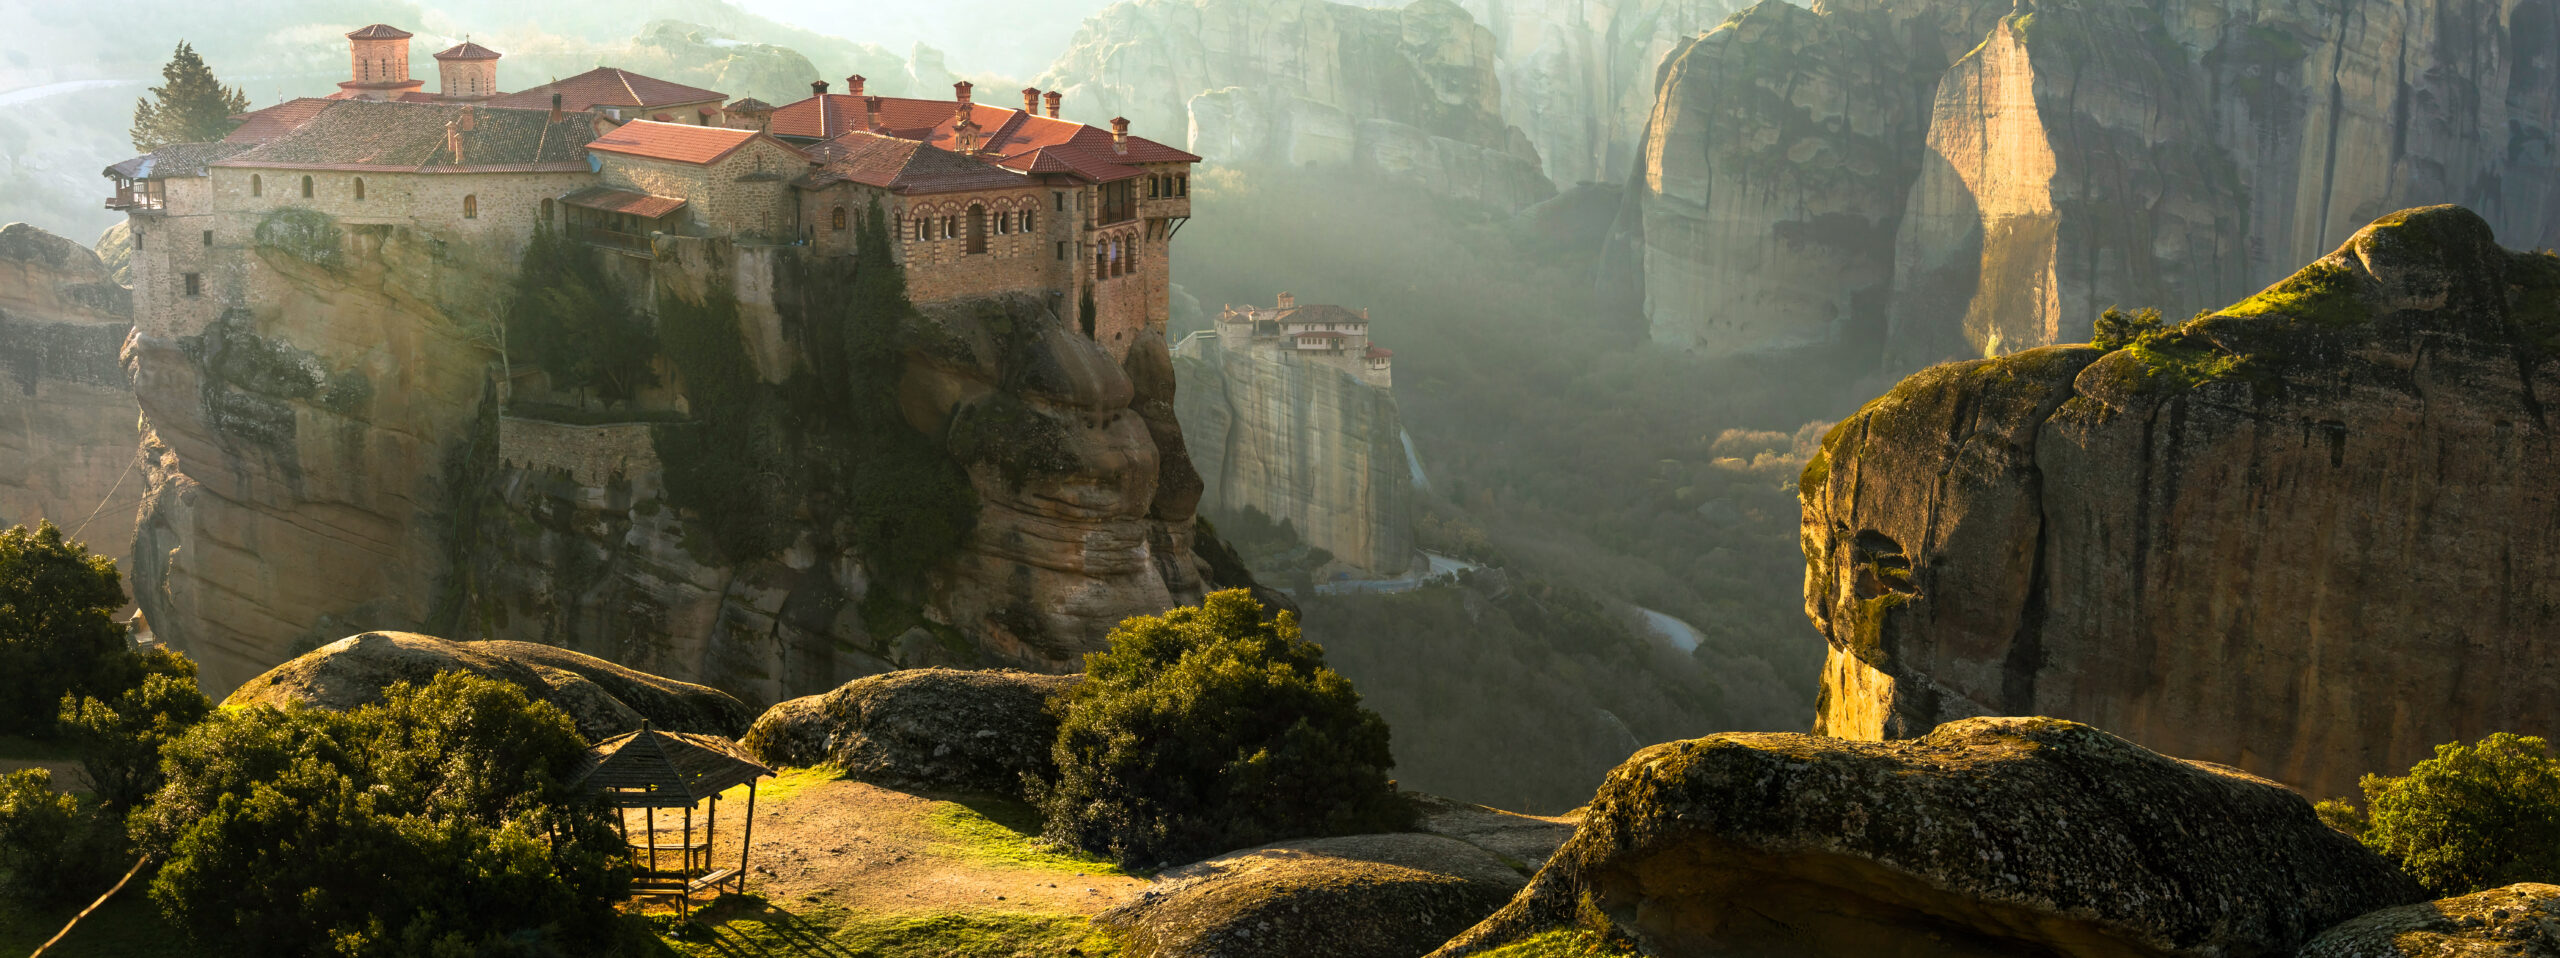 Mysterious hanging over rocks monasteries